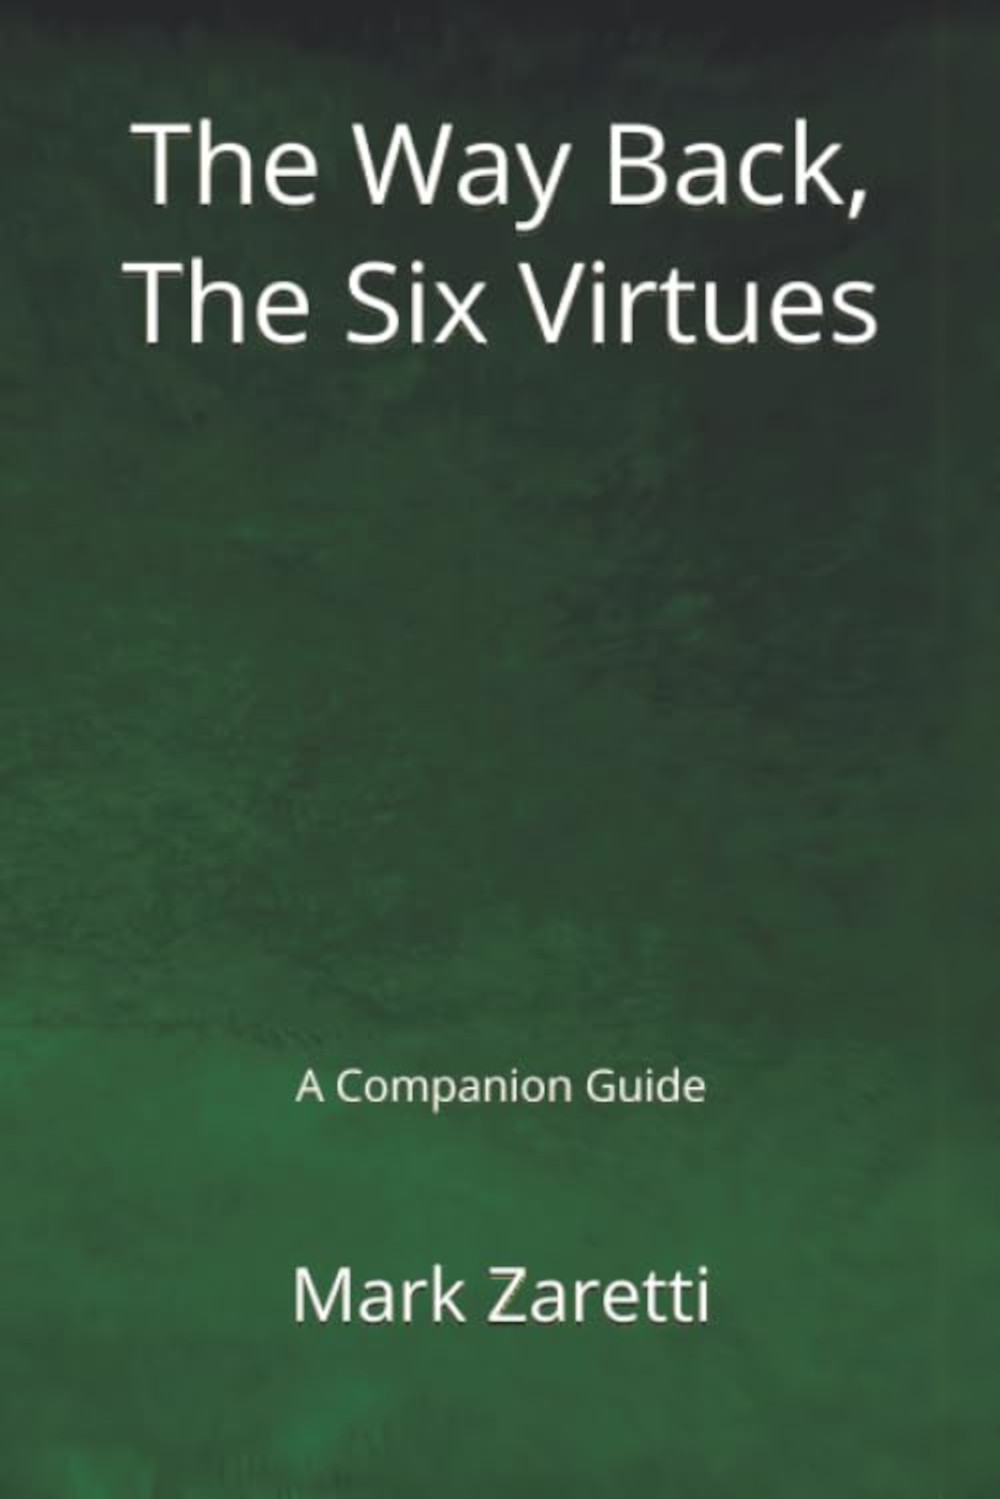 The Way Back: The Six Virtues Book